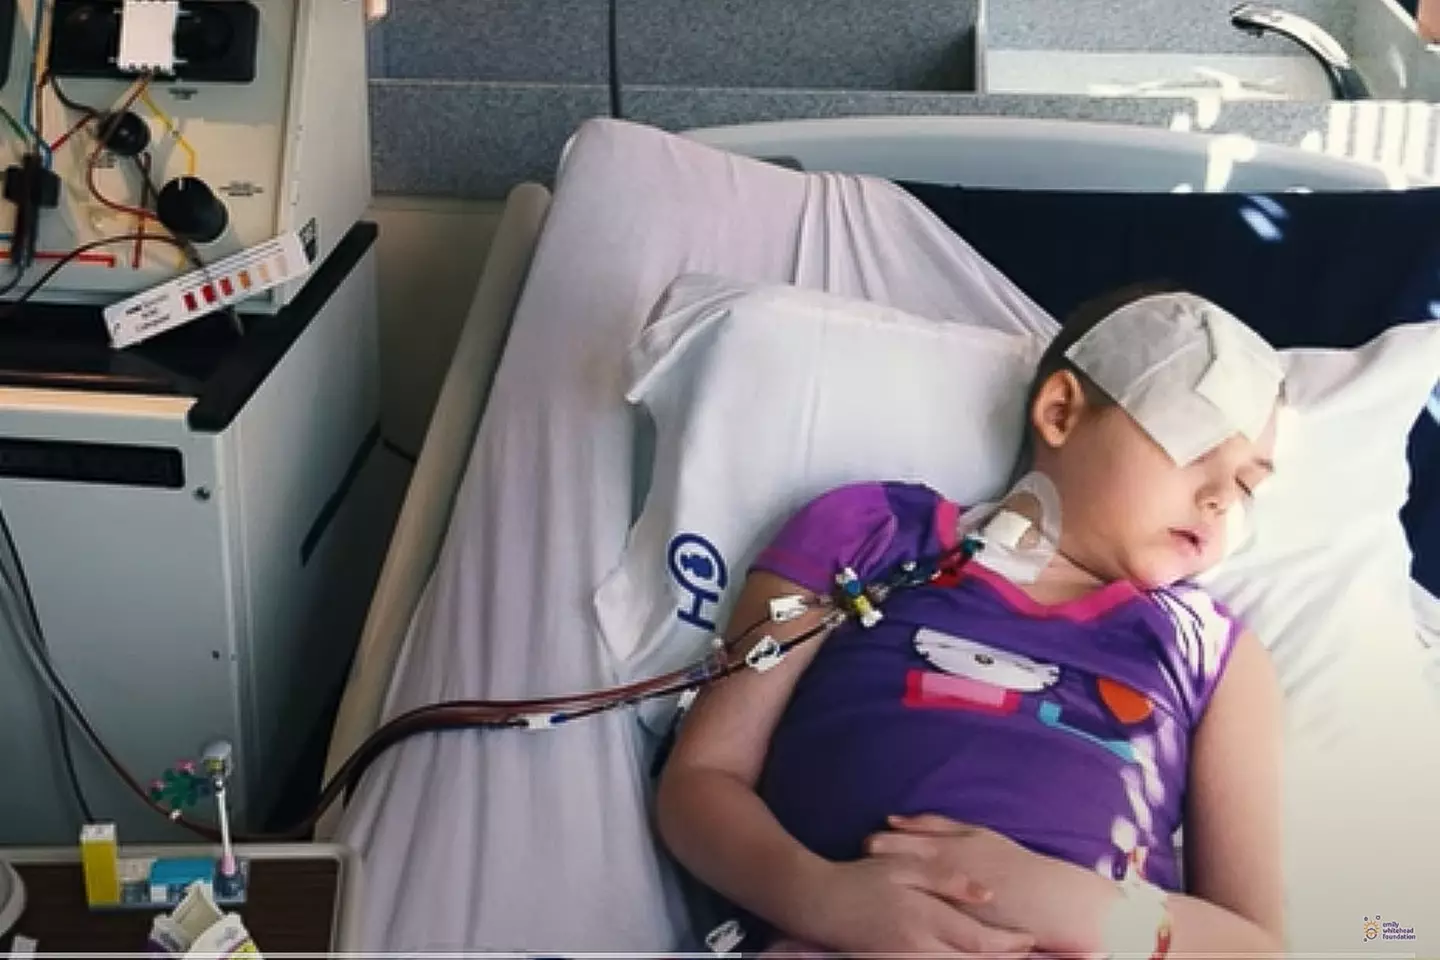 Emily Whitehead was diagnosed with leukaemia when she was just five years old.